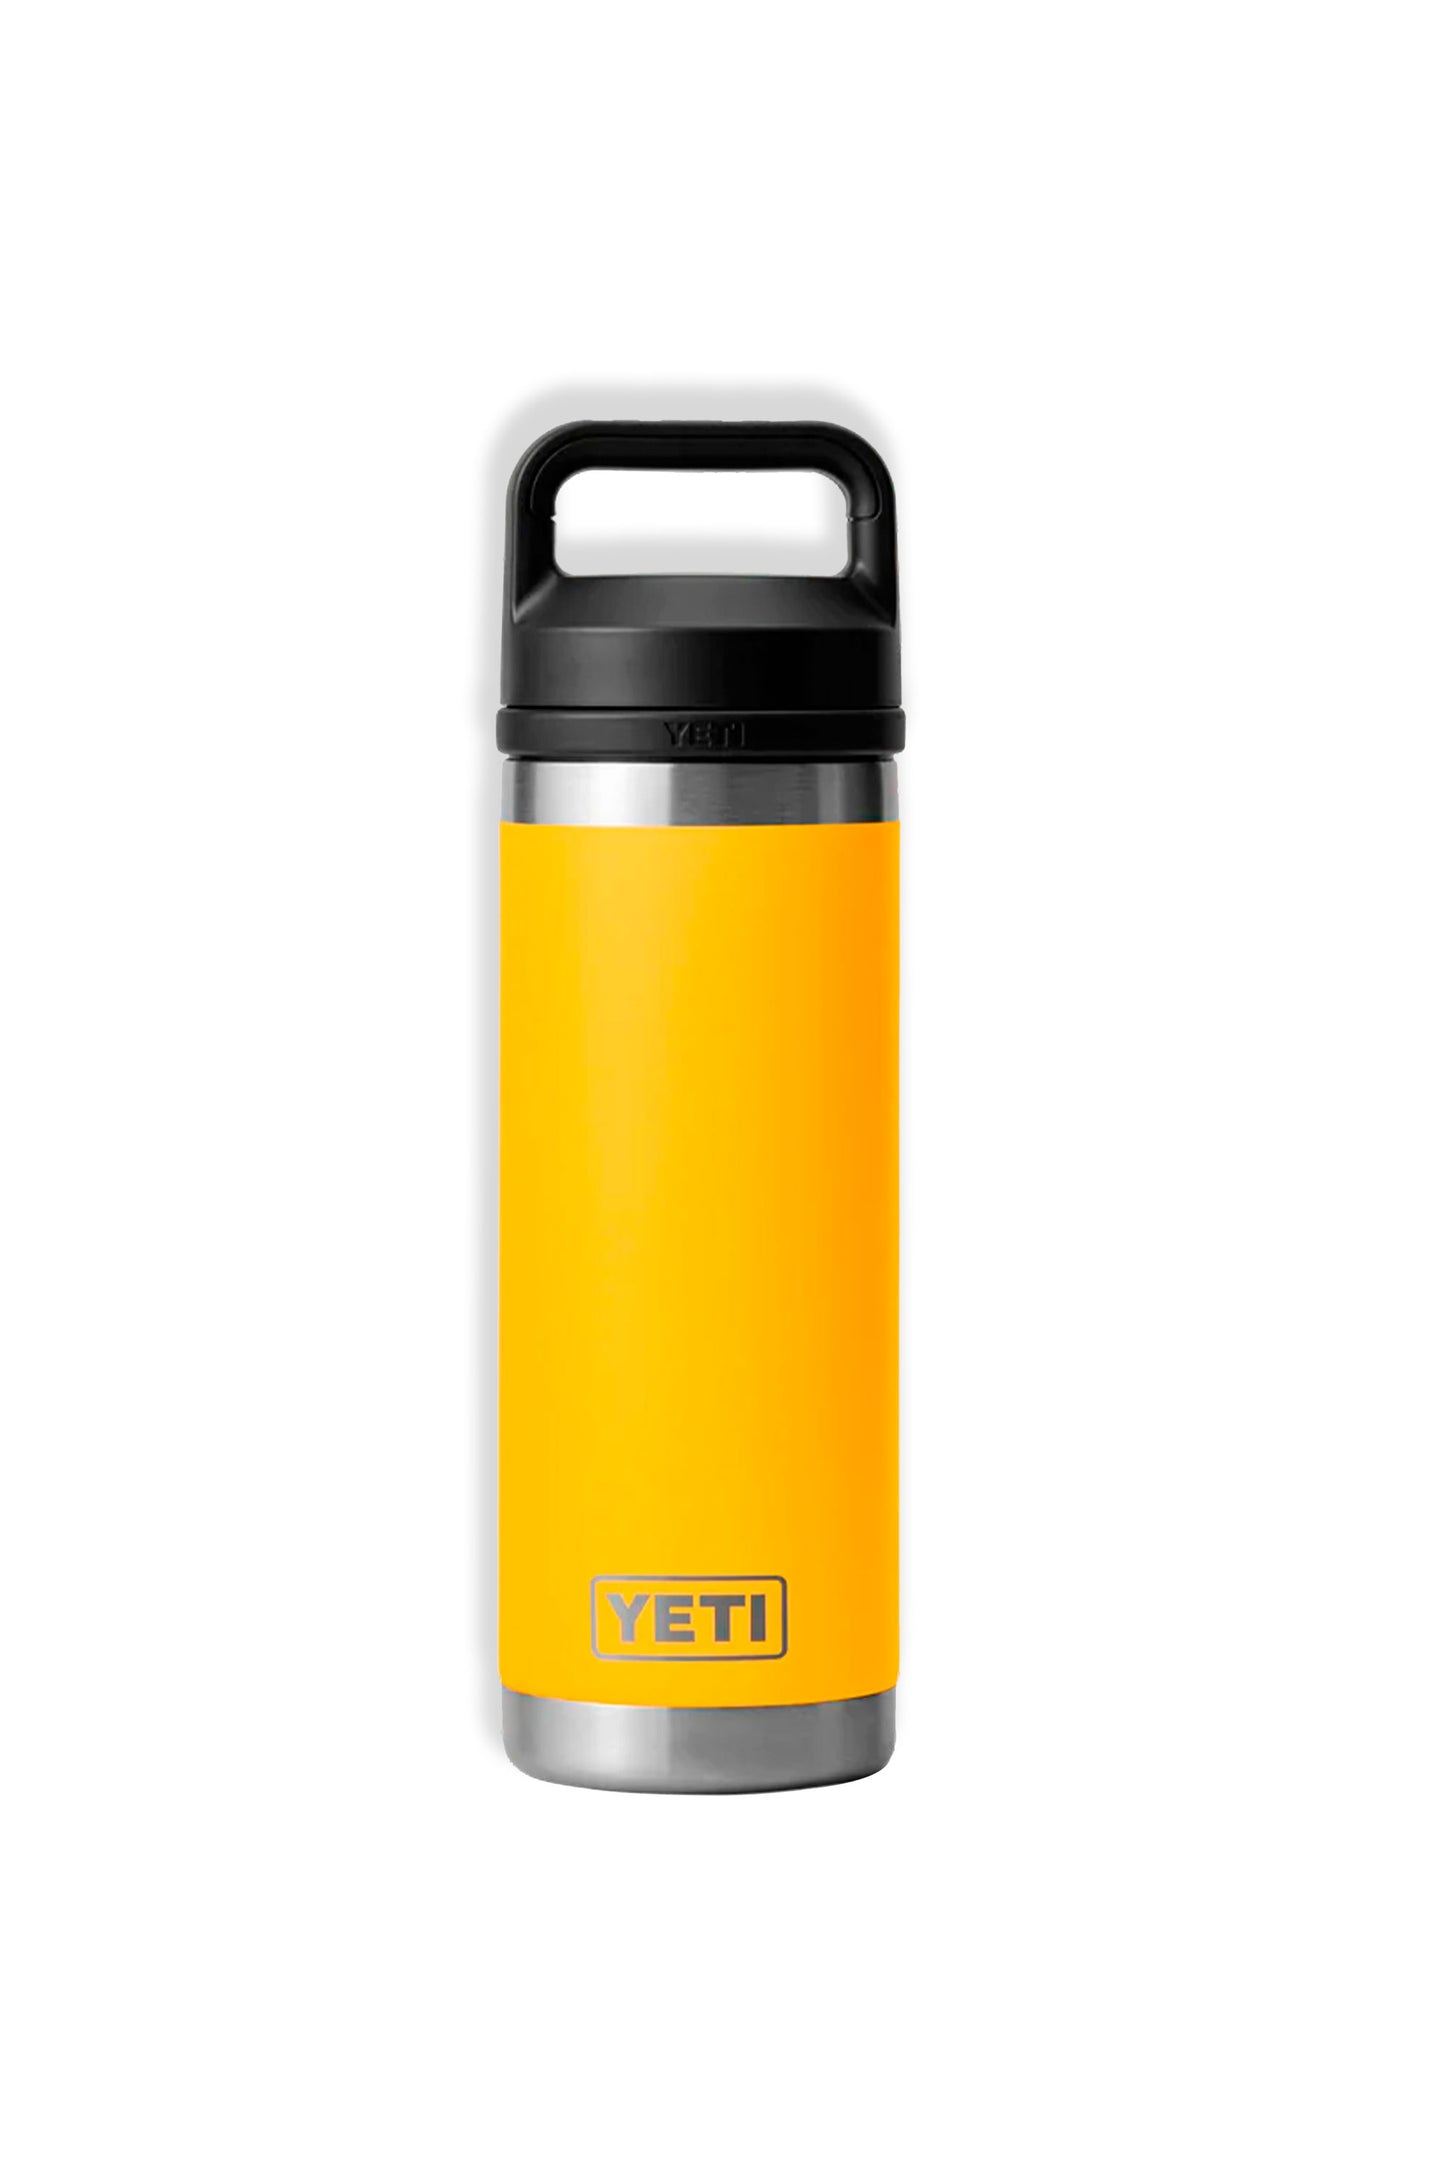  Straw lid for Yeti Rambler 18 26 36 64 oz, Lid with